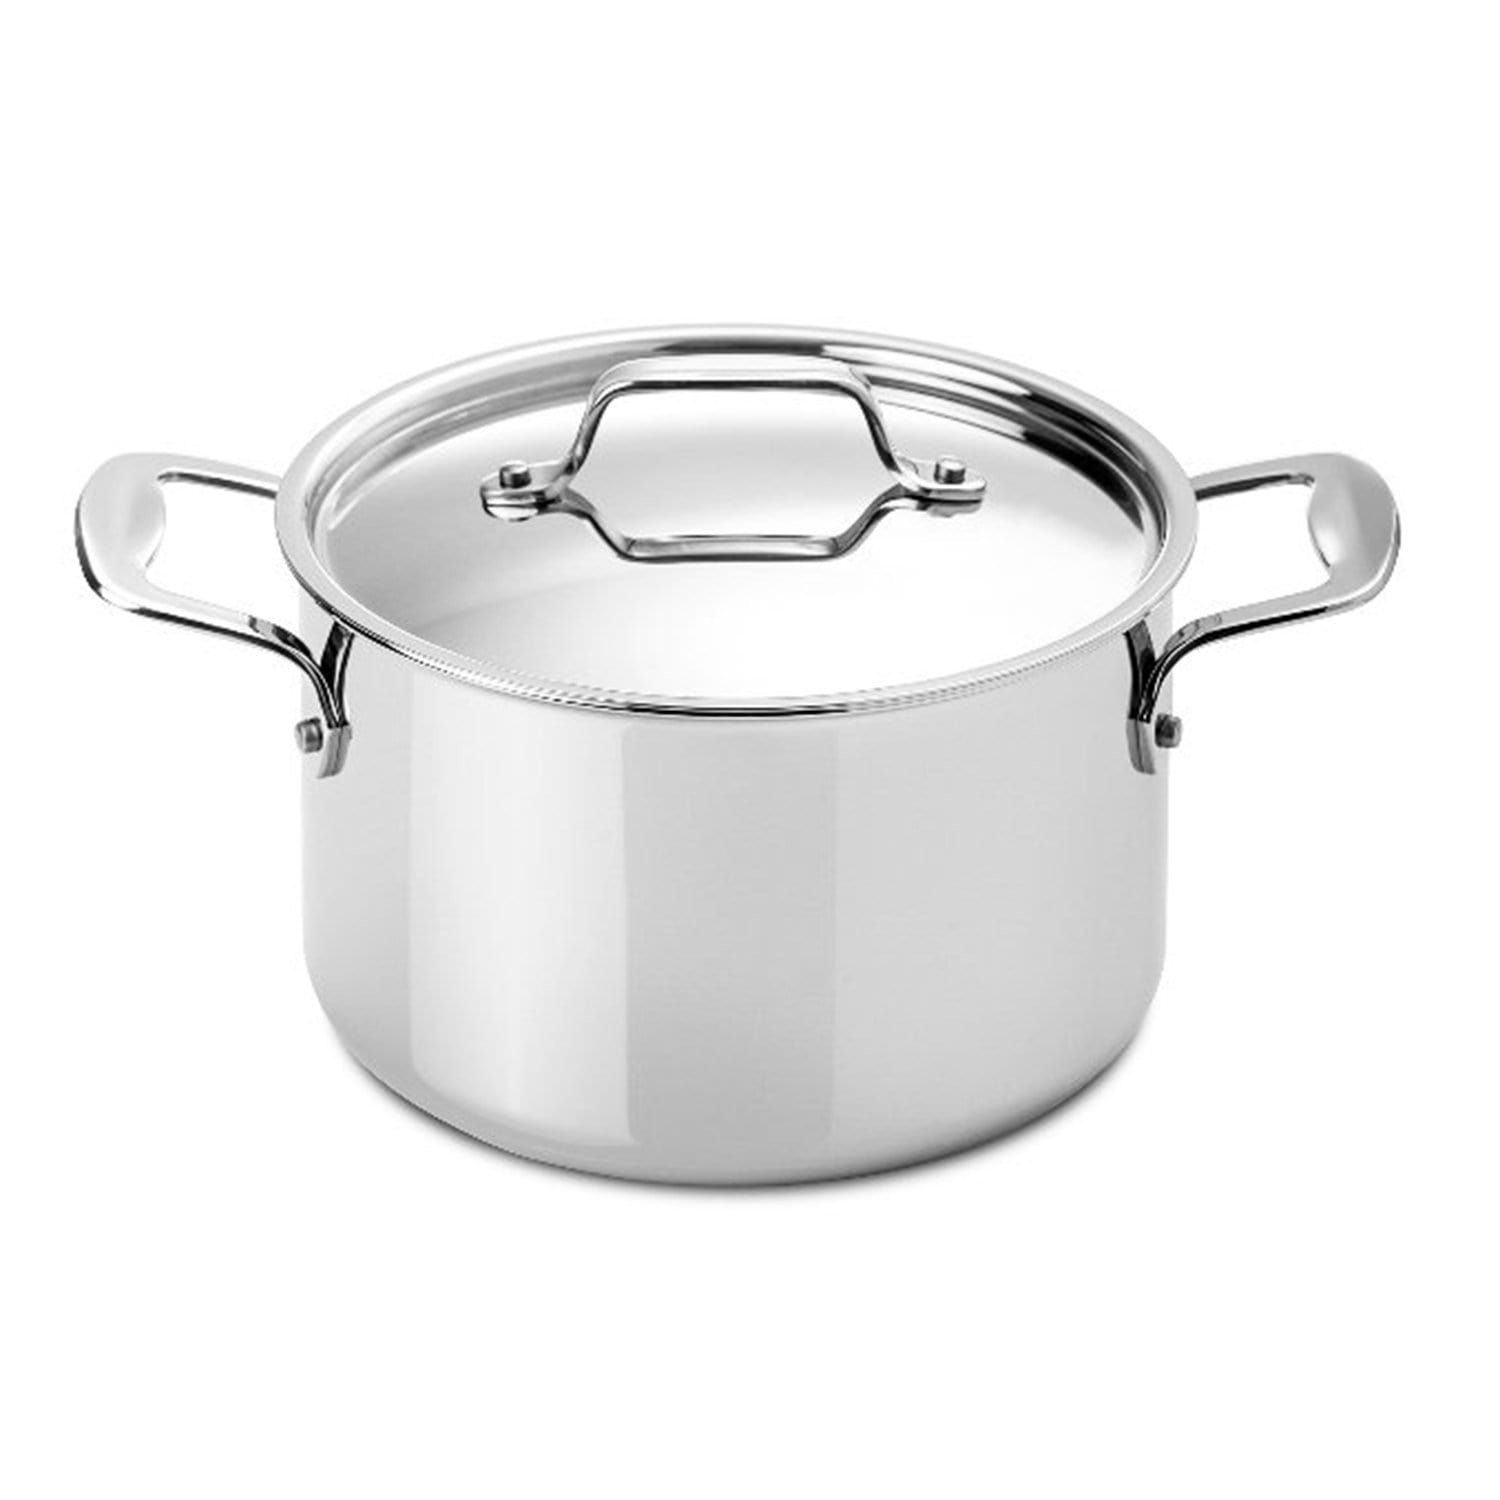 Silampos Supremeprof Stockpot with Lid - Silver, 20 cm - 639002BG6620 - Jashanmal Home